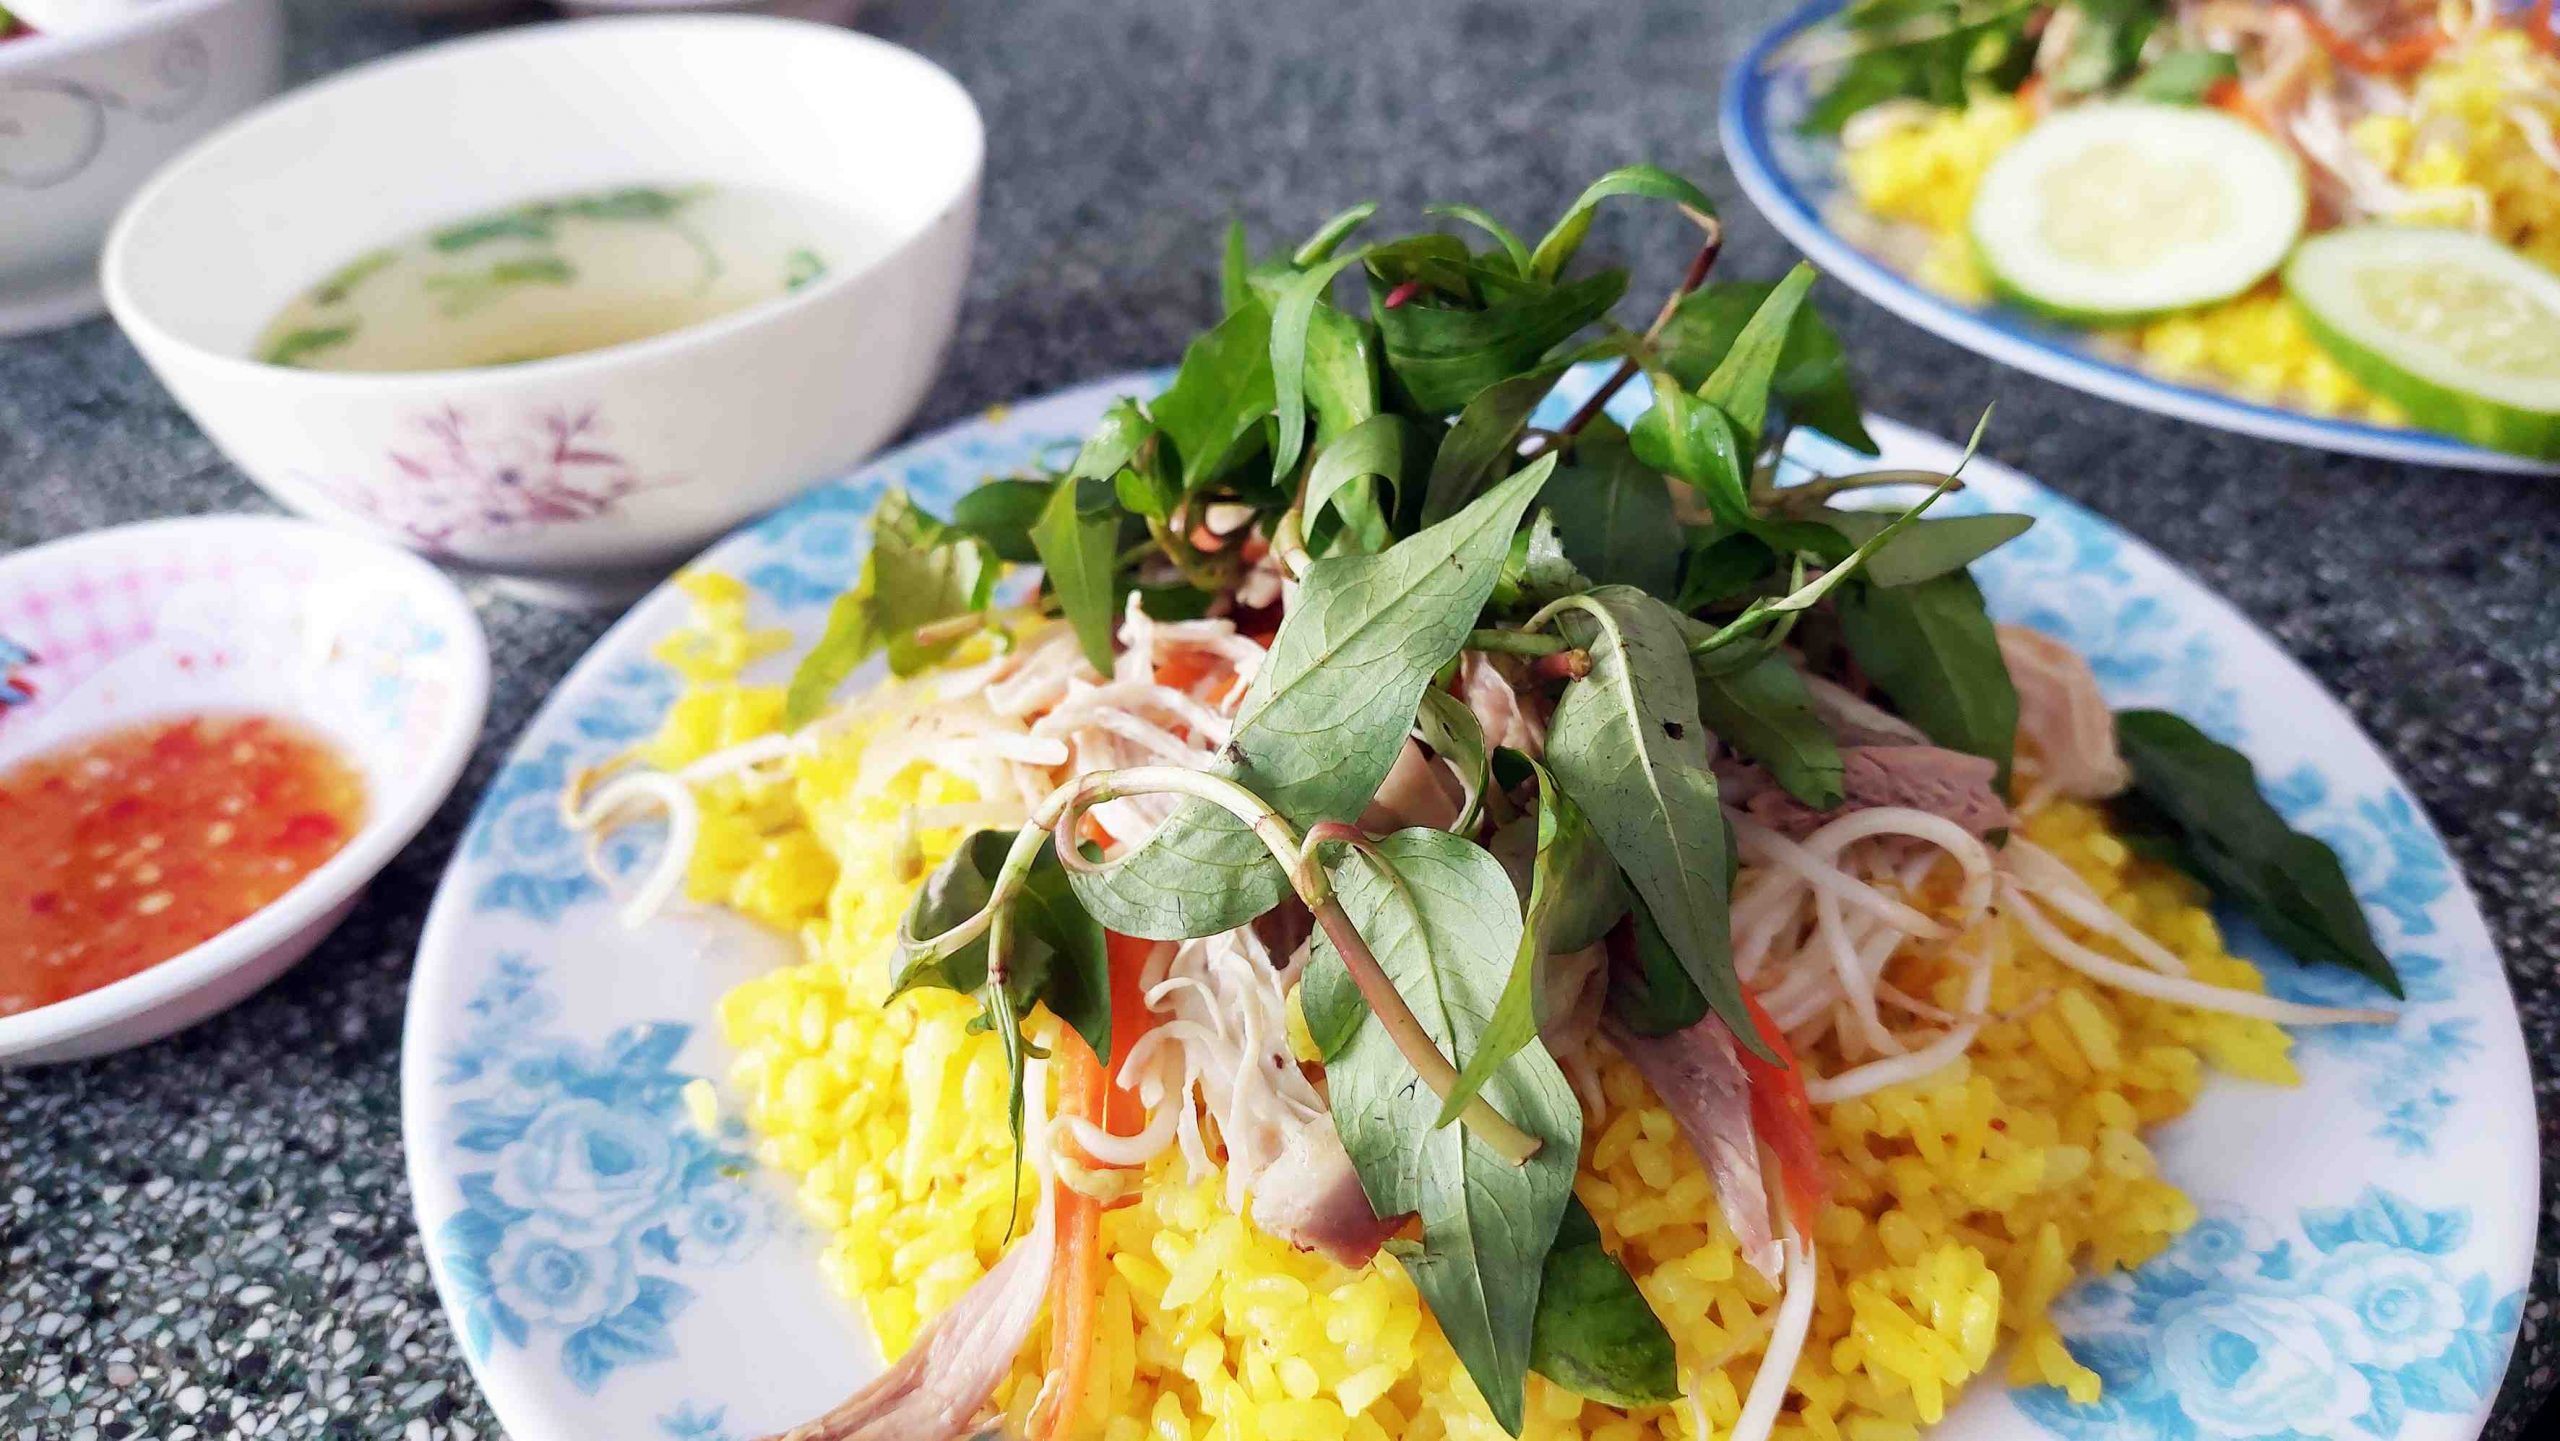 Starting the day with Phu Yen-style chicken rice